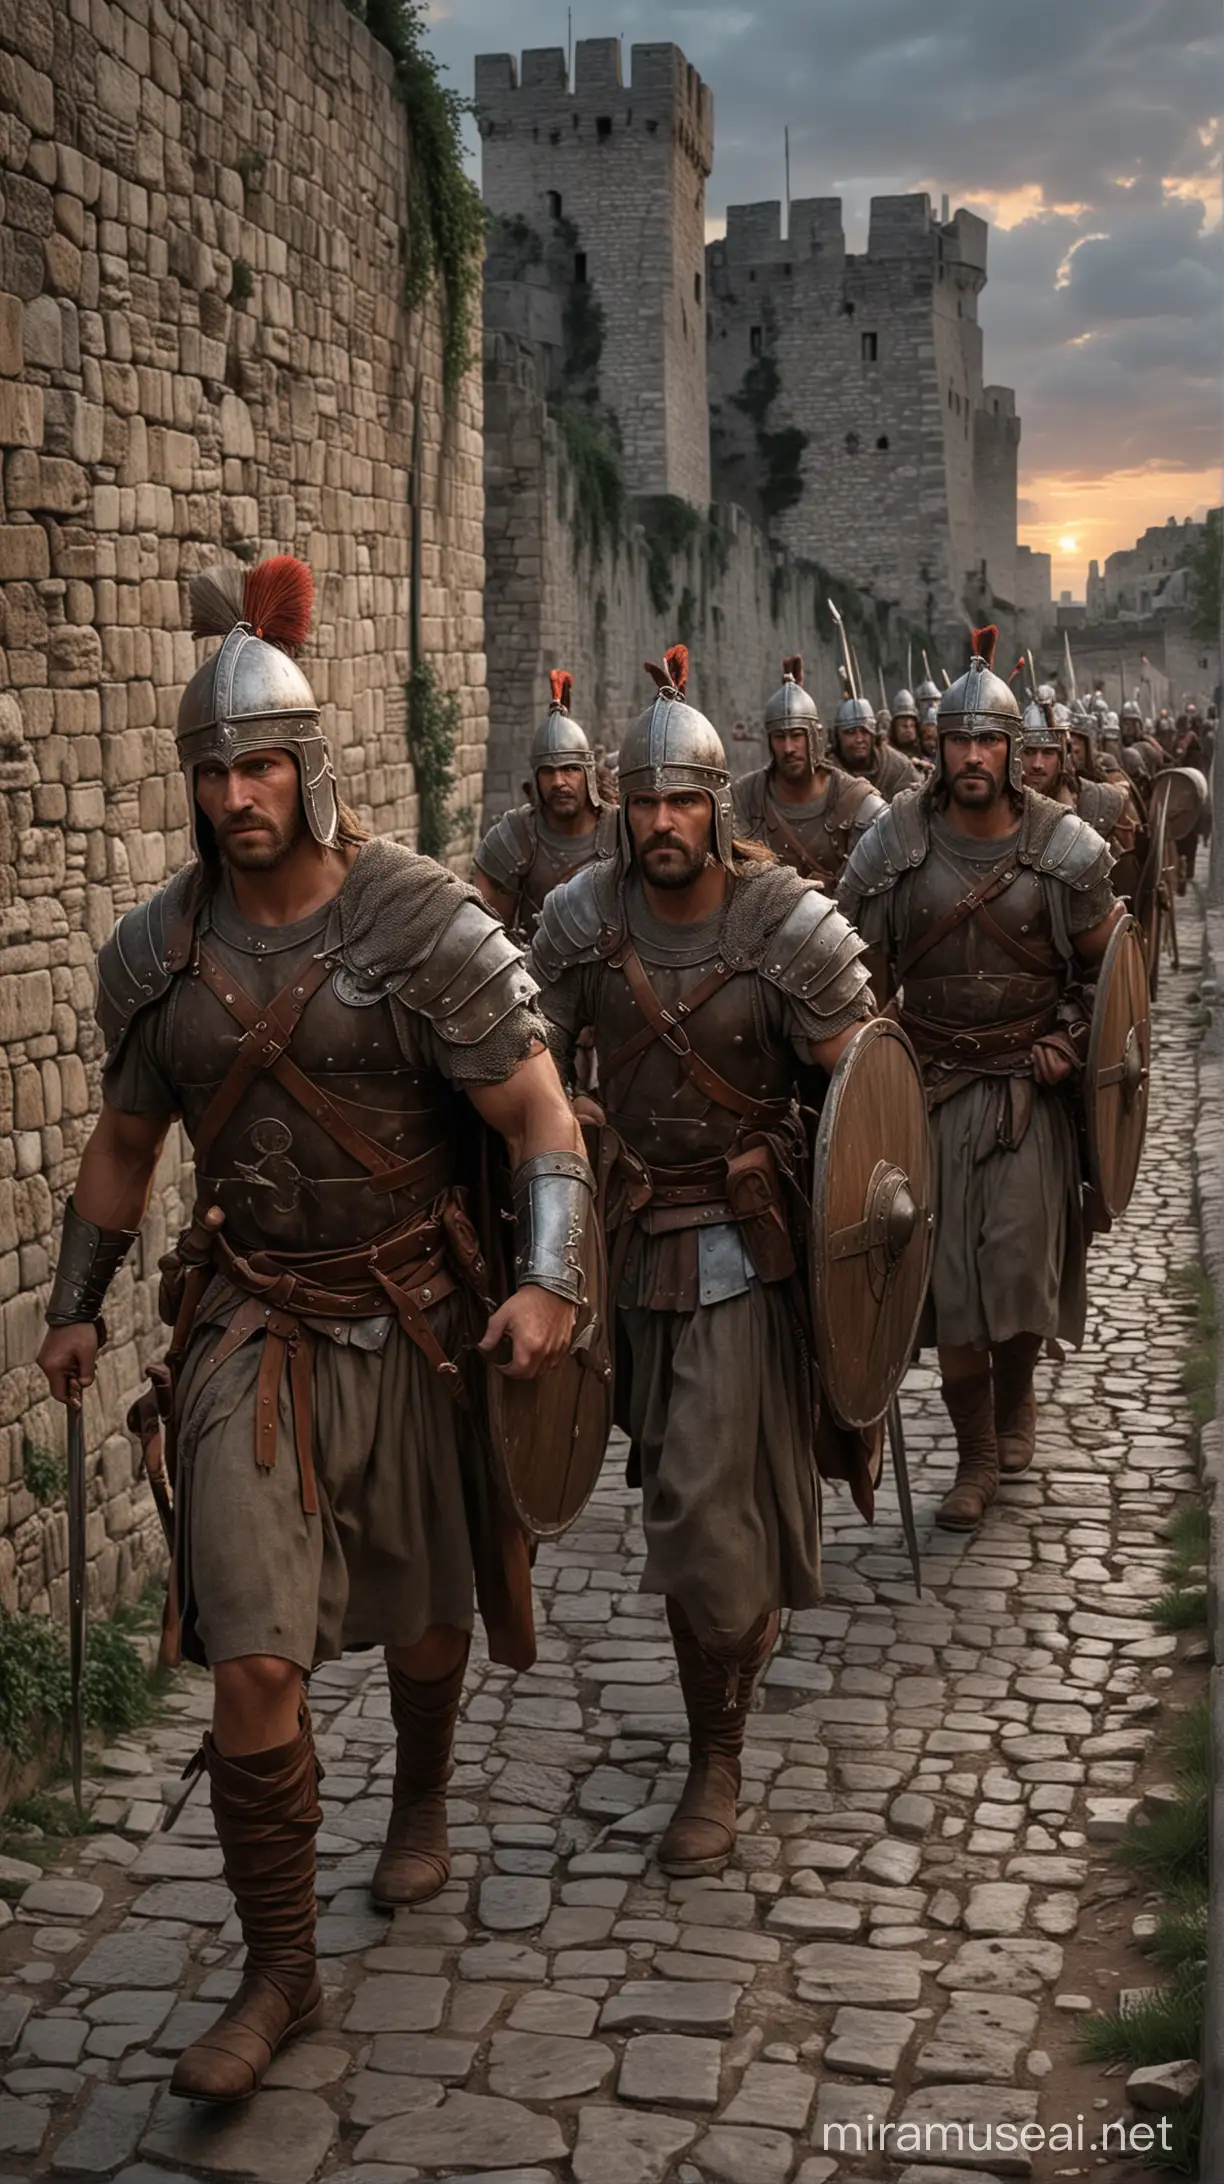 Gallic warriors pacing atop the city walls, their faces illuminated by the fading light. hyper realitic